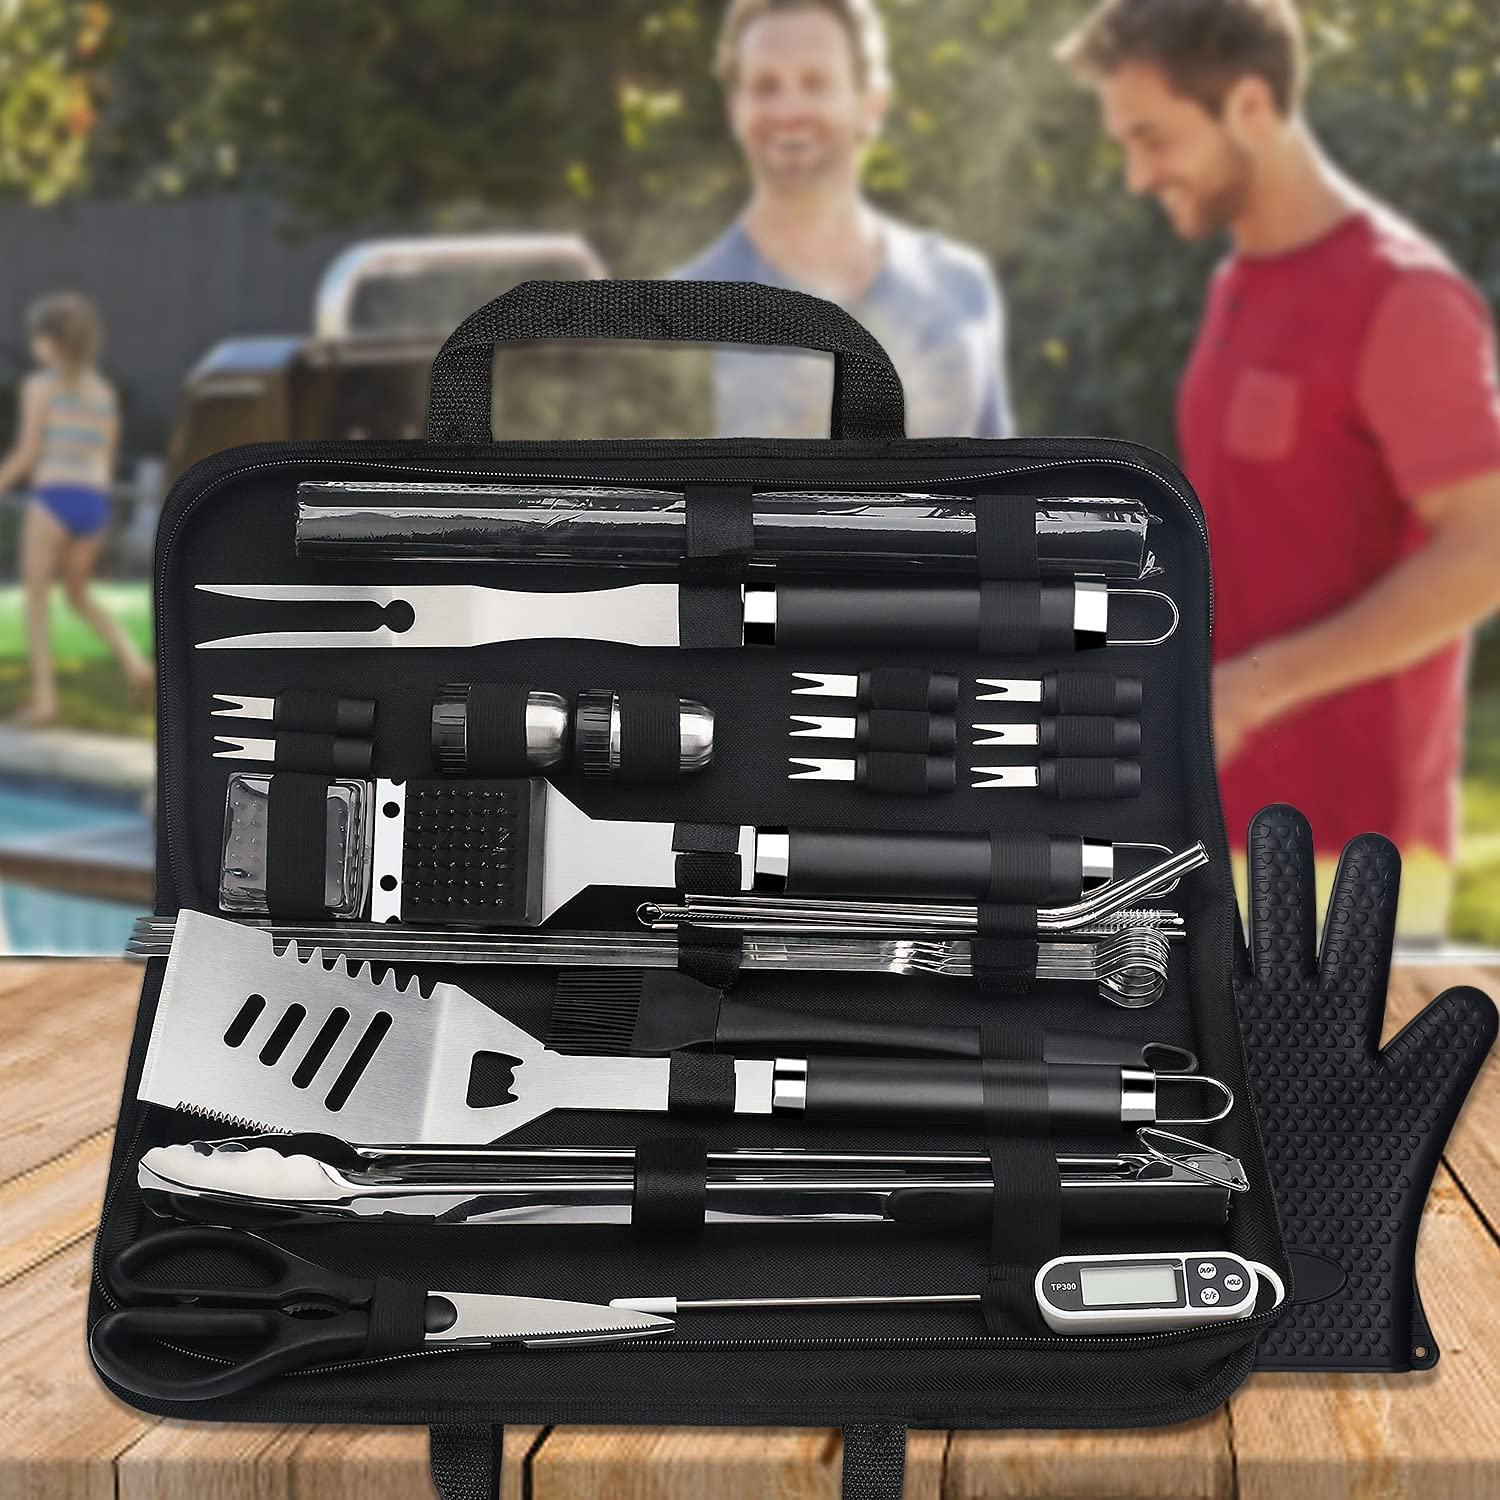 Grilling Gifts for Men Smoker Accessories - BBQ Sauce Pot and Basting Brush  Set Cool Kitchen Gadgets, Unique Christmas Stocking Stuffer Gifts for Dad